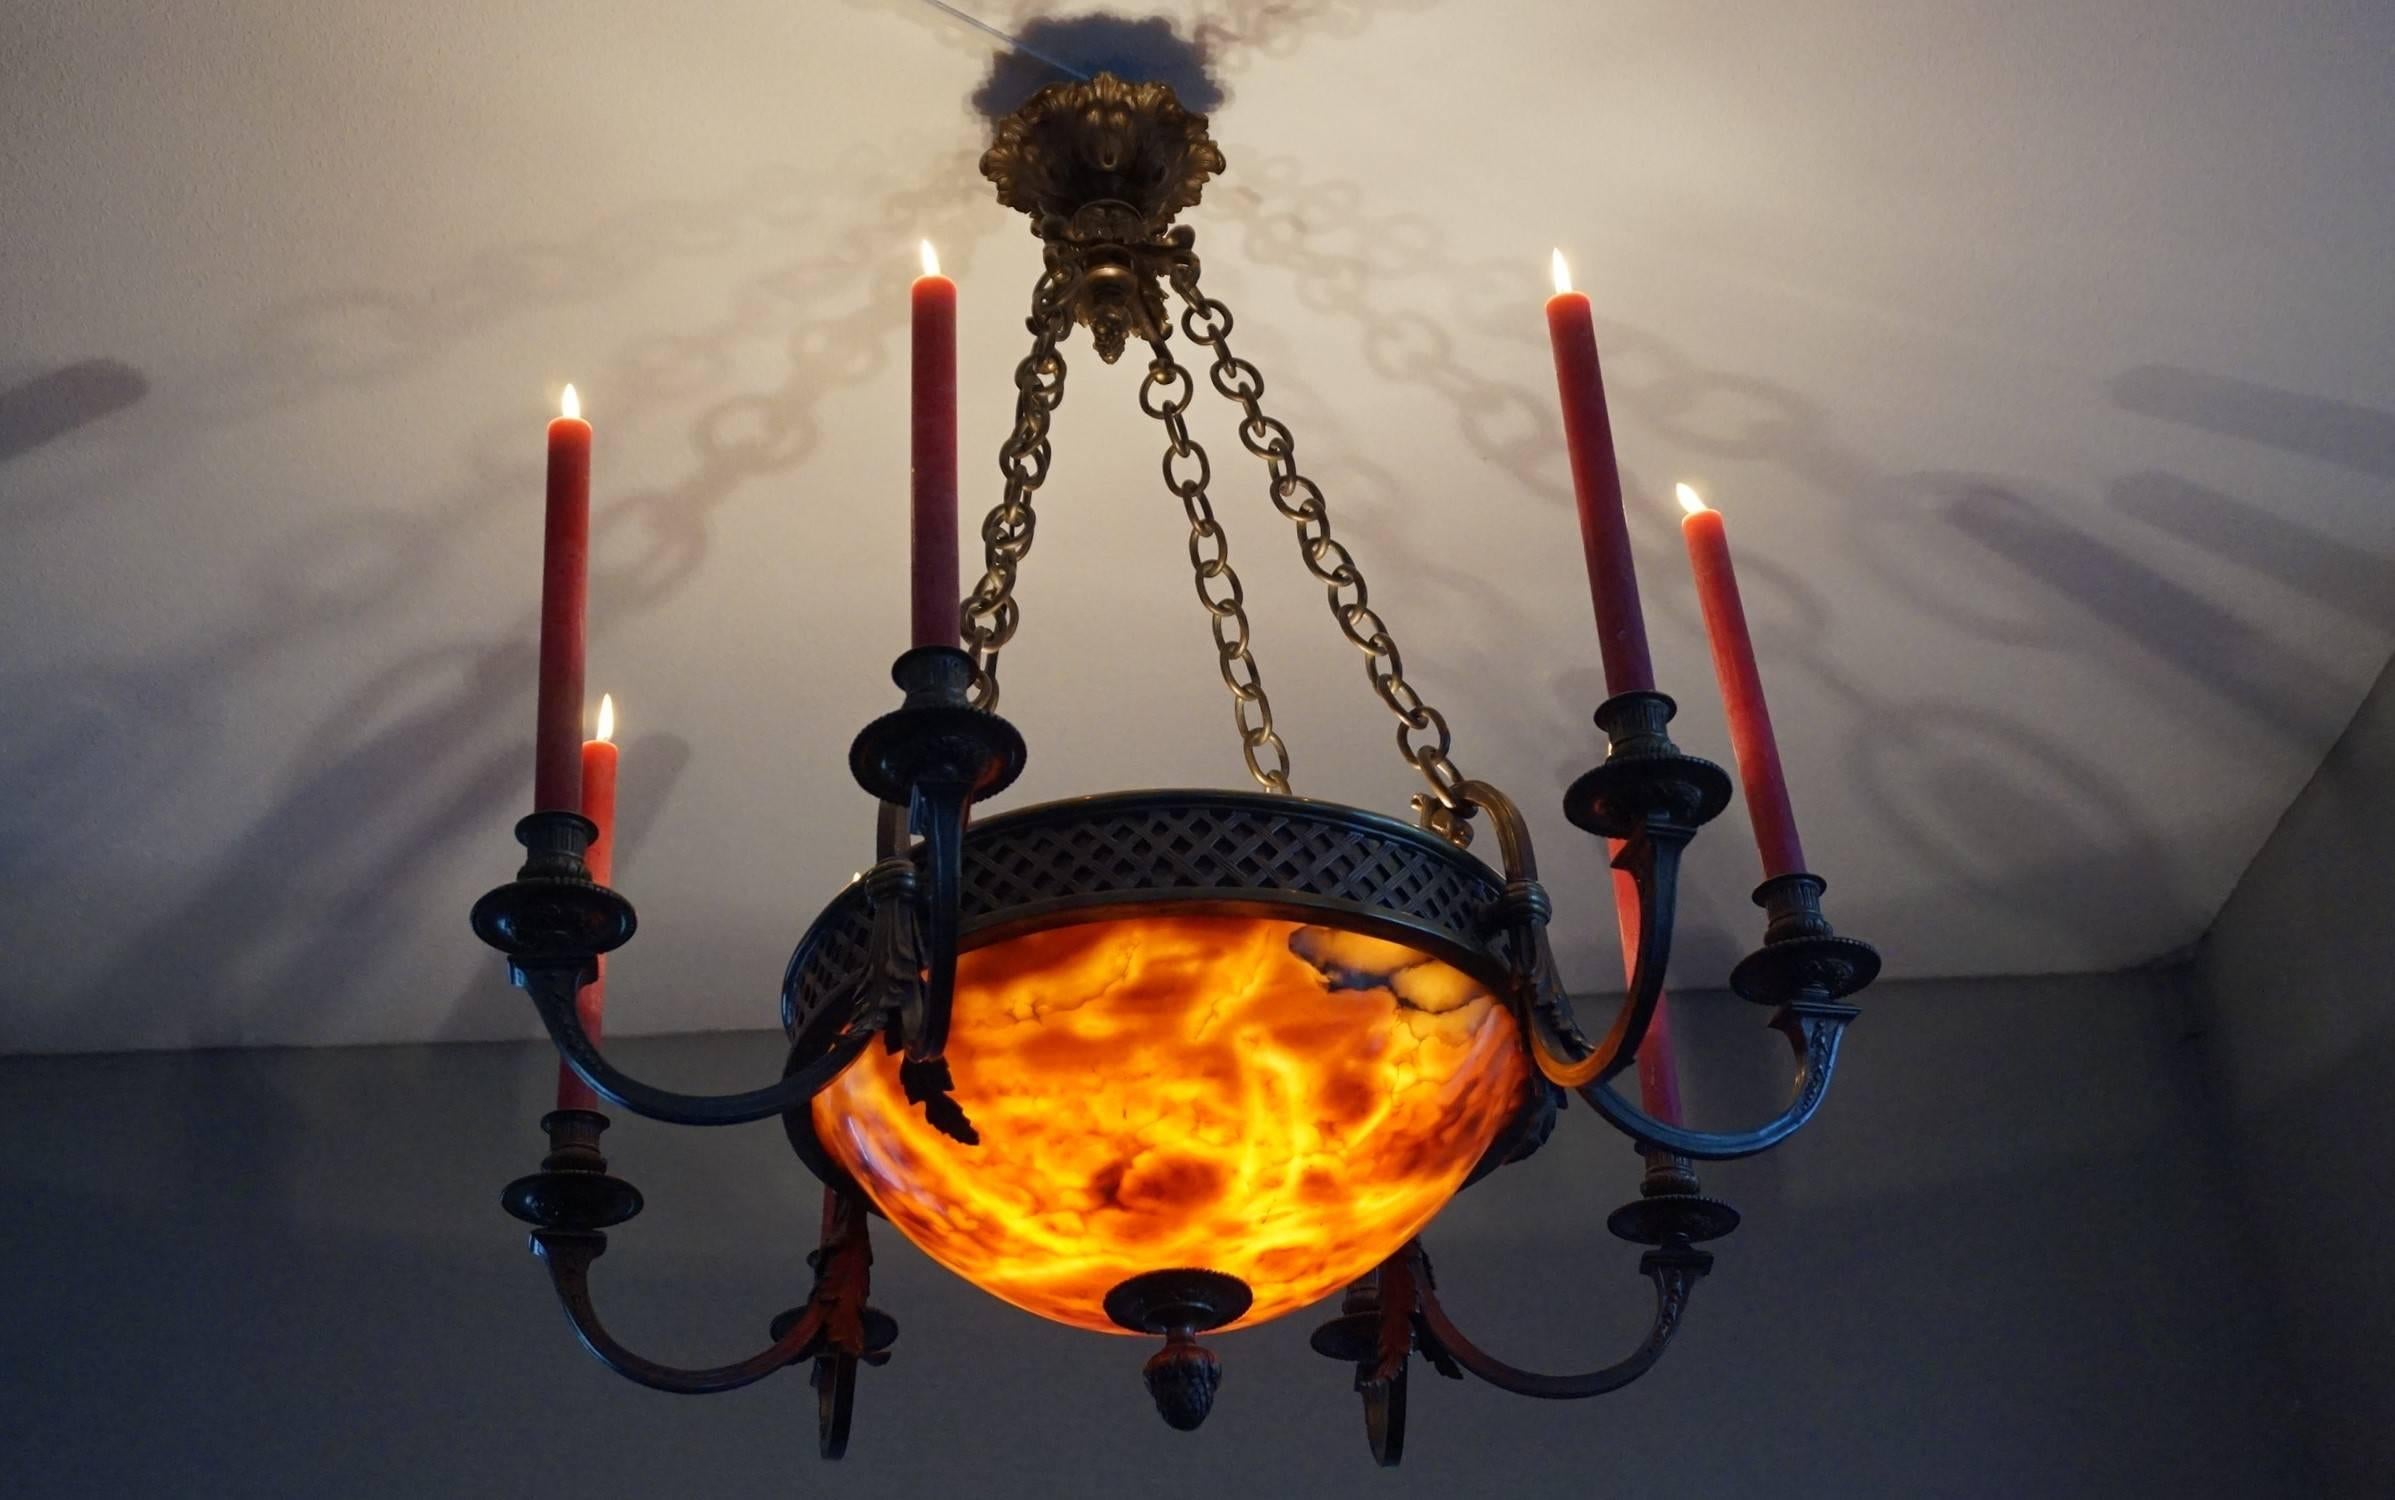 Early 1900s, European top quality workmanship chandelier.

This impressive and all handcrafted chandelier from early 20th century Europe has the most wonderful look and feel. This sizable and quality made light fixture can single- handedly turn any